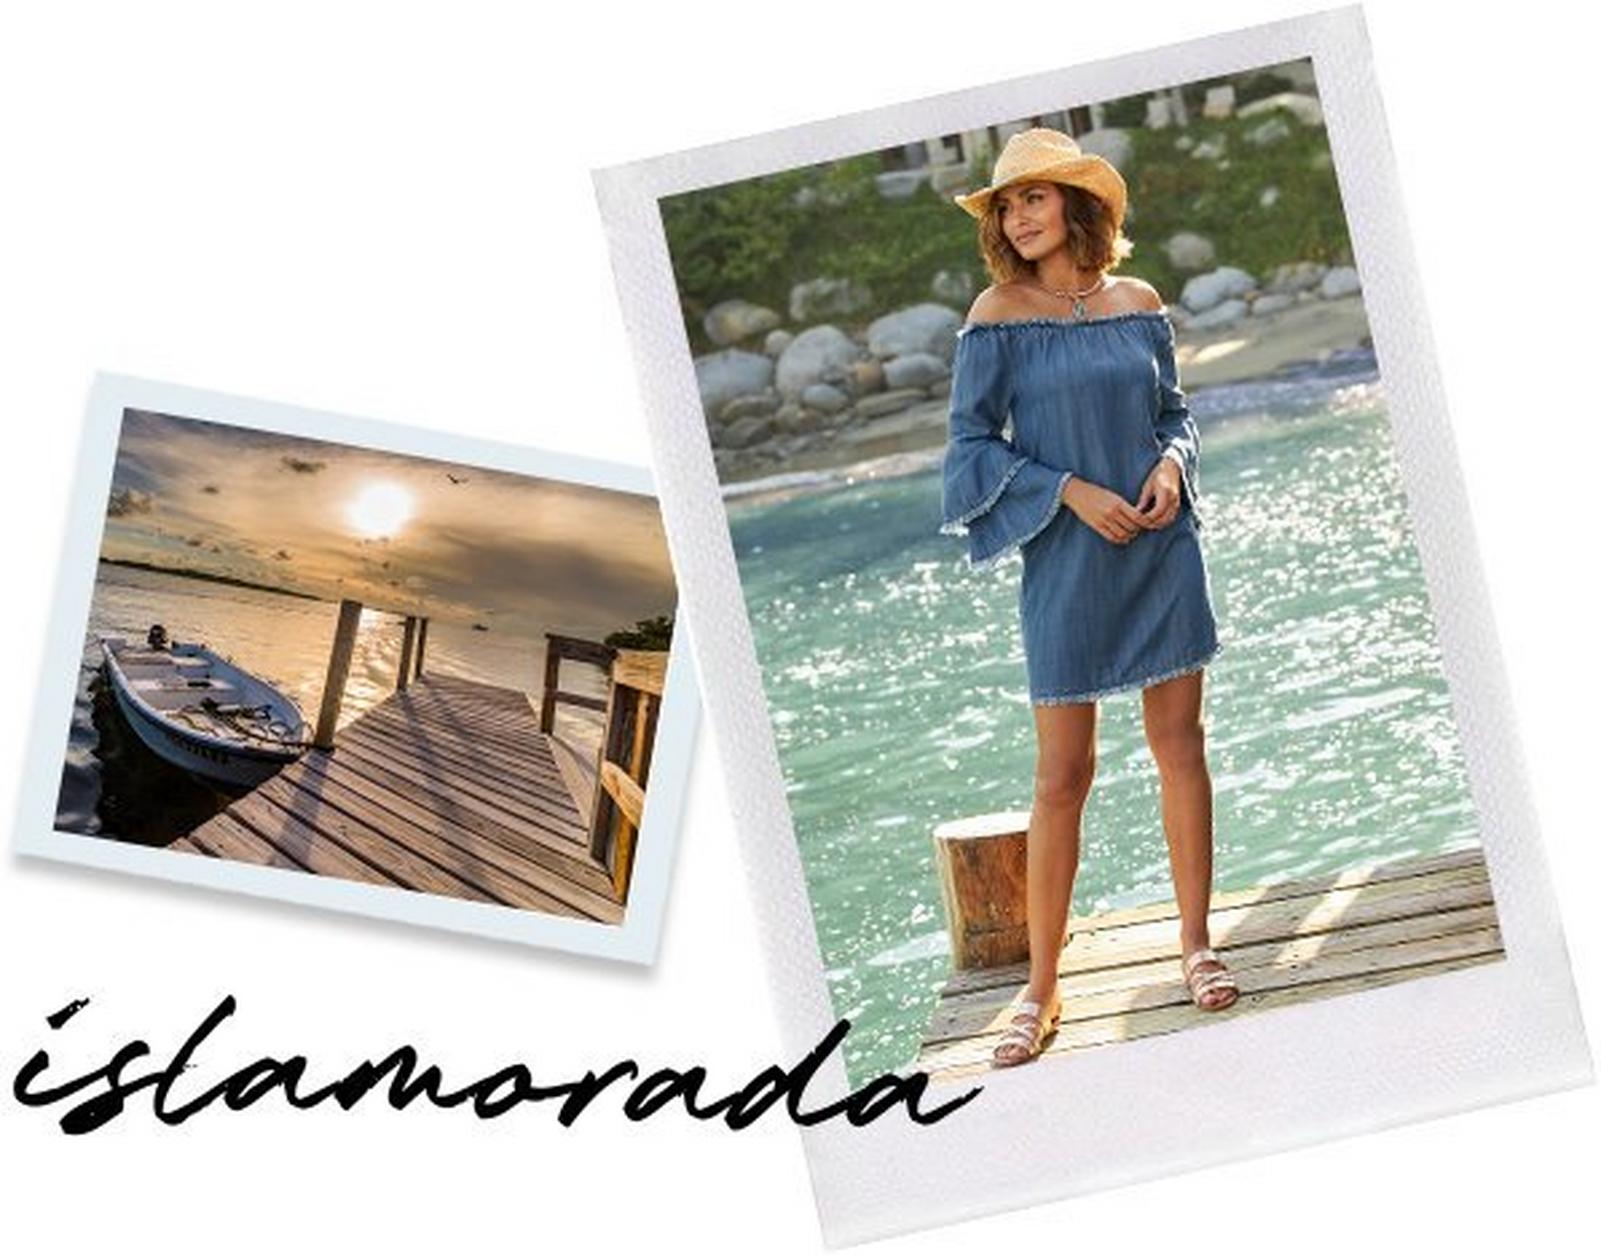 left panel shows a picture of islamorada. right model wearing a denim off-the-shoulder flare sleeve dress, cowboy hat, and white strappy sandals.